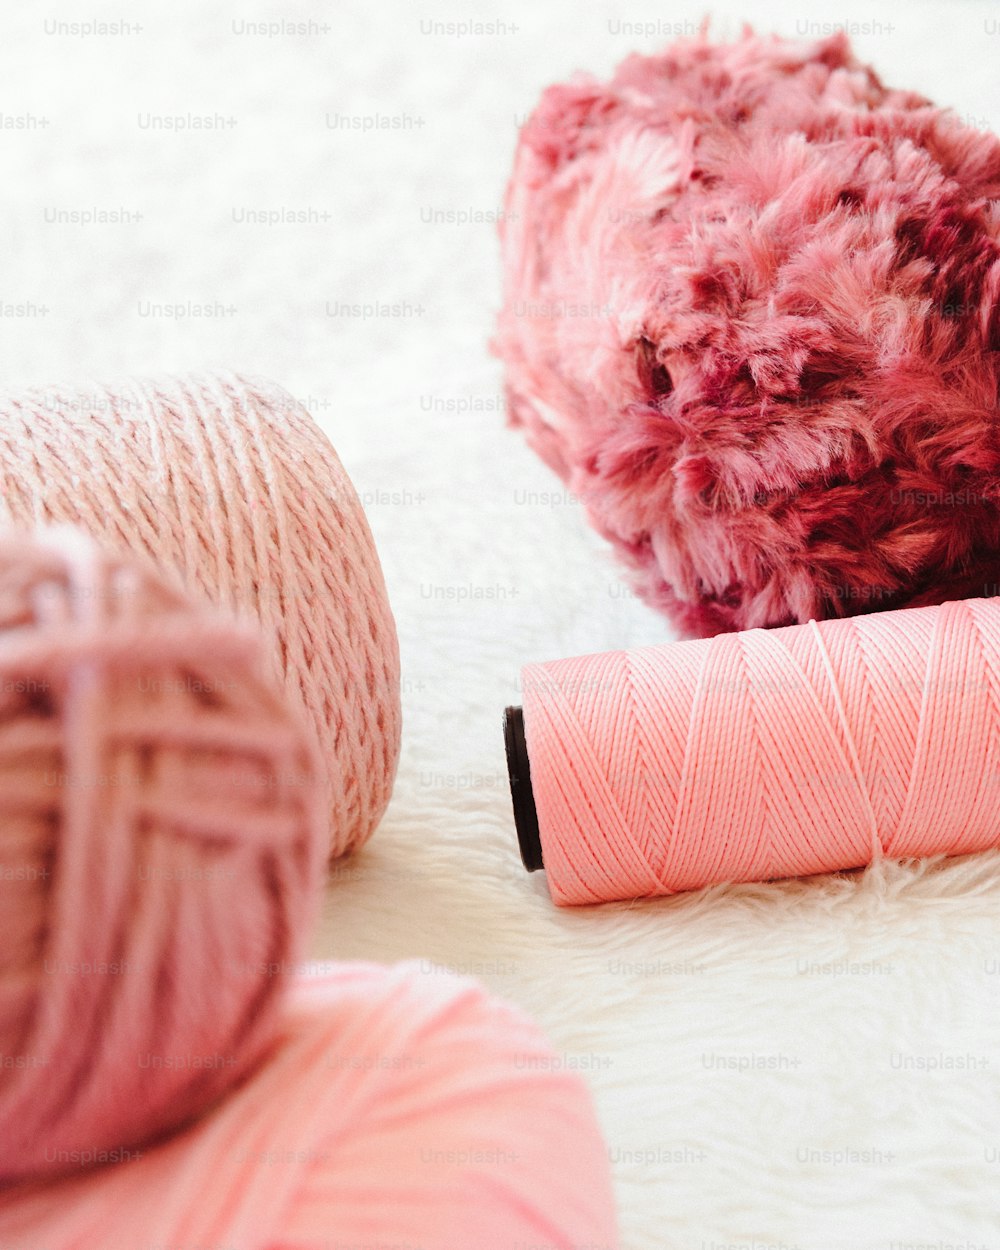 a pink ball of yarn next to a pink ball of yarn